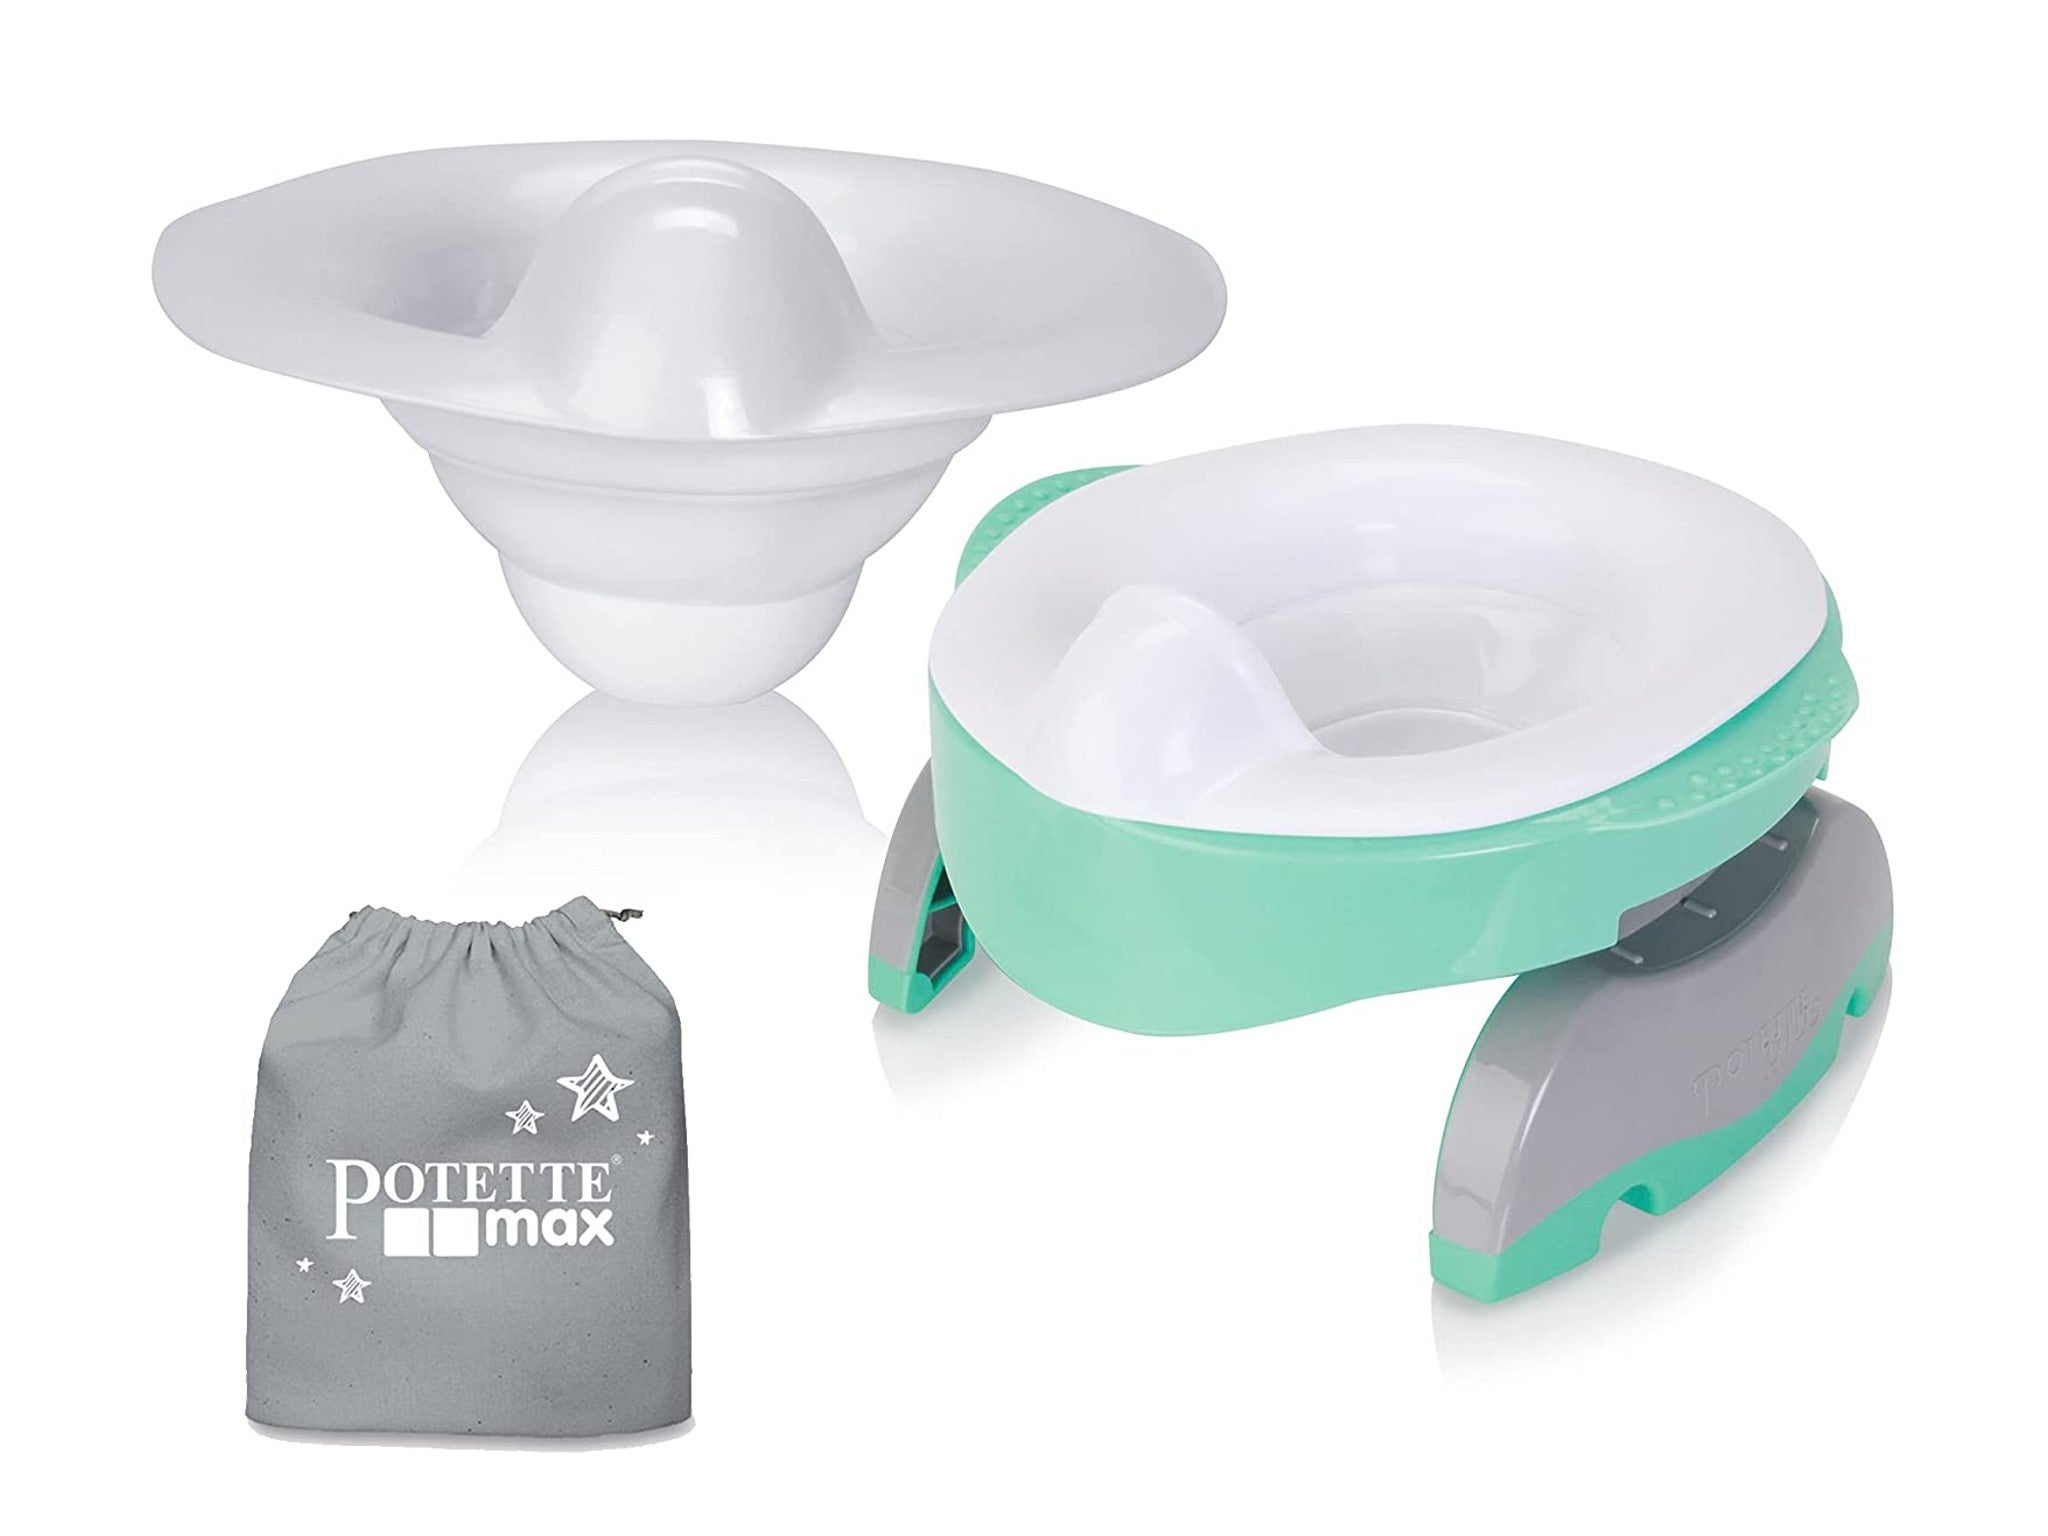 Potette max 3-in-1 portable folding travel potty and toilet trainer seat indybest.jpeg